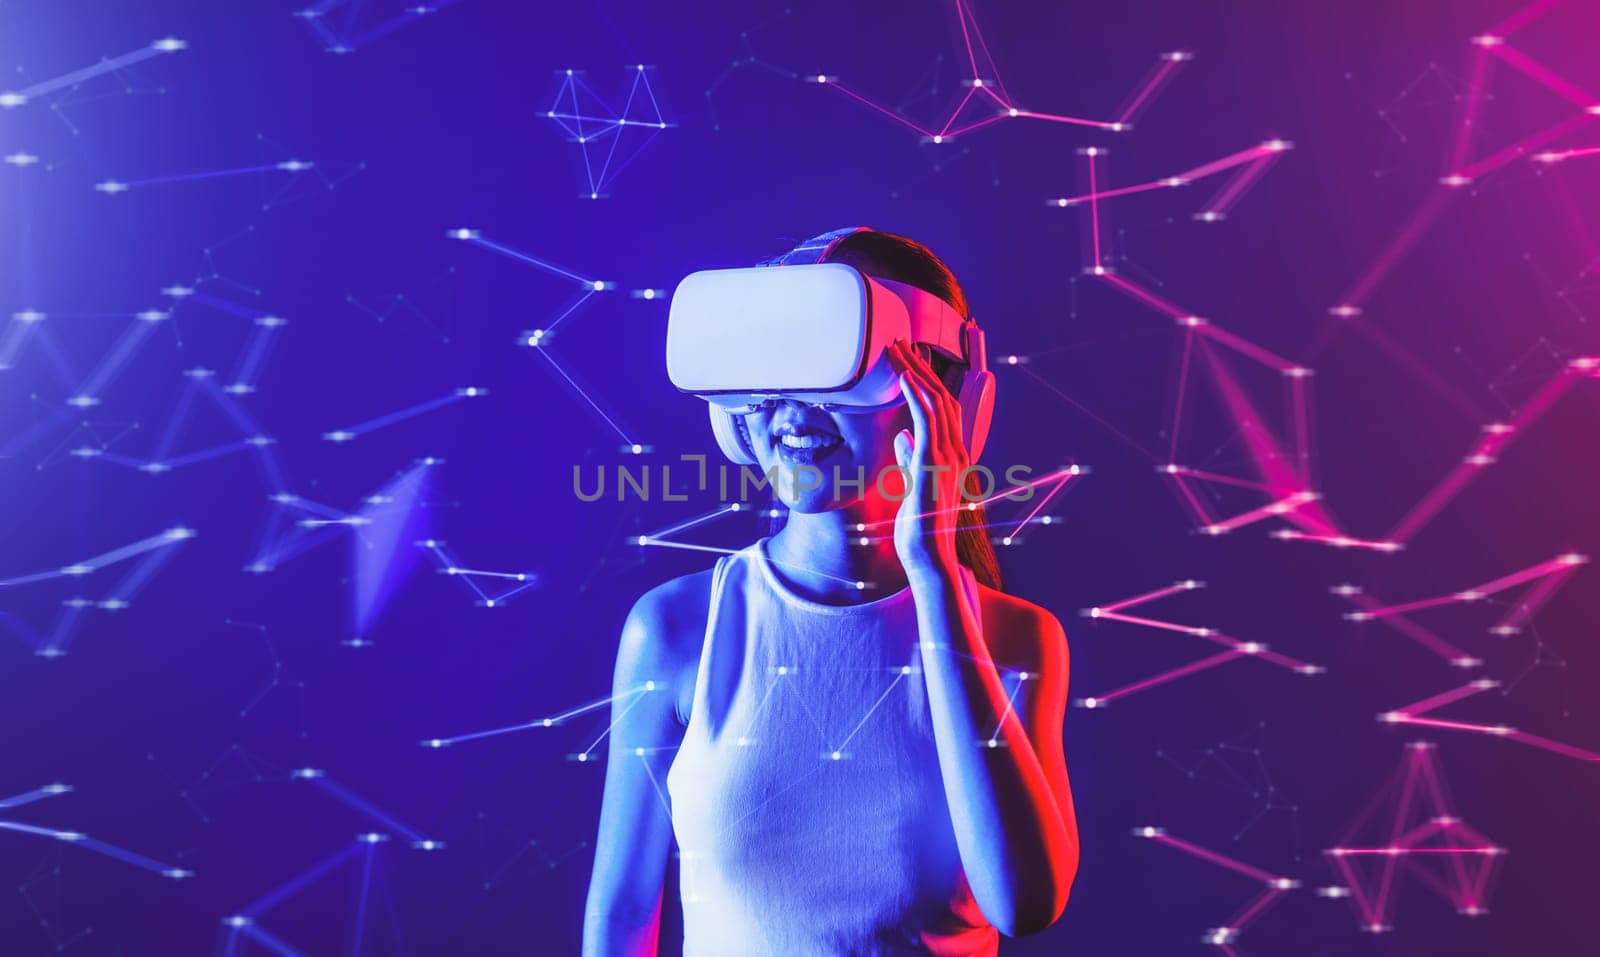 Female stand in cyberpunk neon light wear white VR headset and tank top connecting metaverse, future cyberspace community technology, She look in virtual reality object holding goggles. Hallucination.